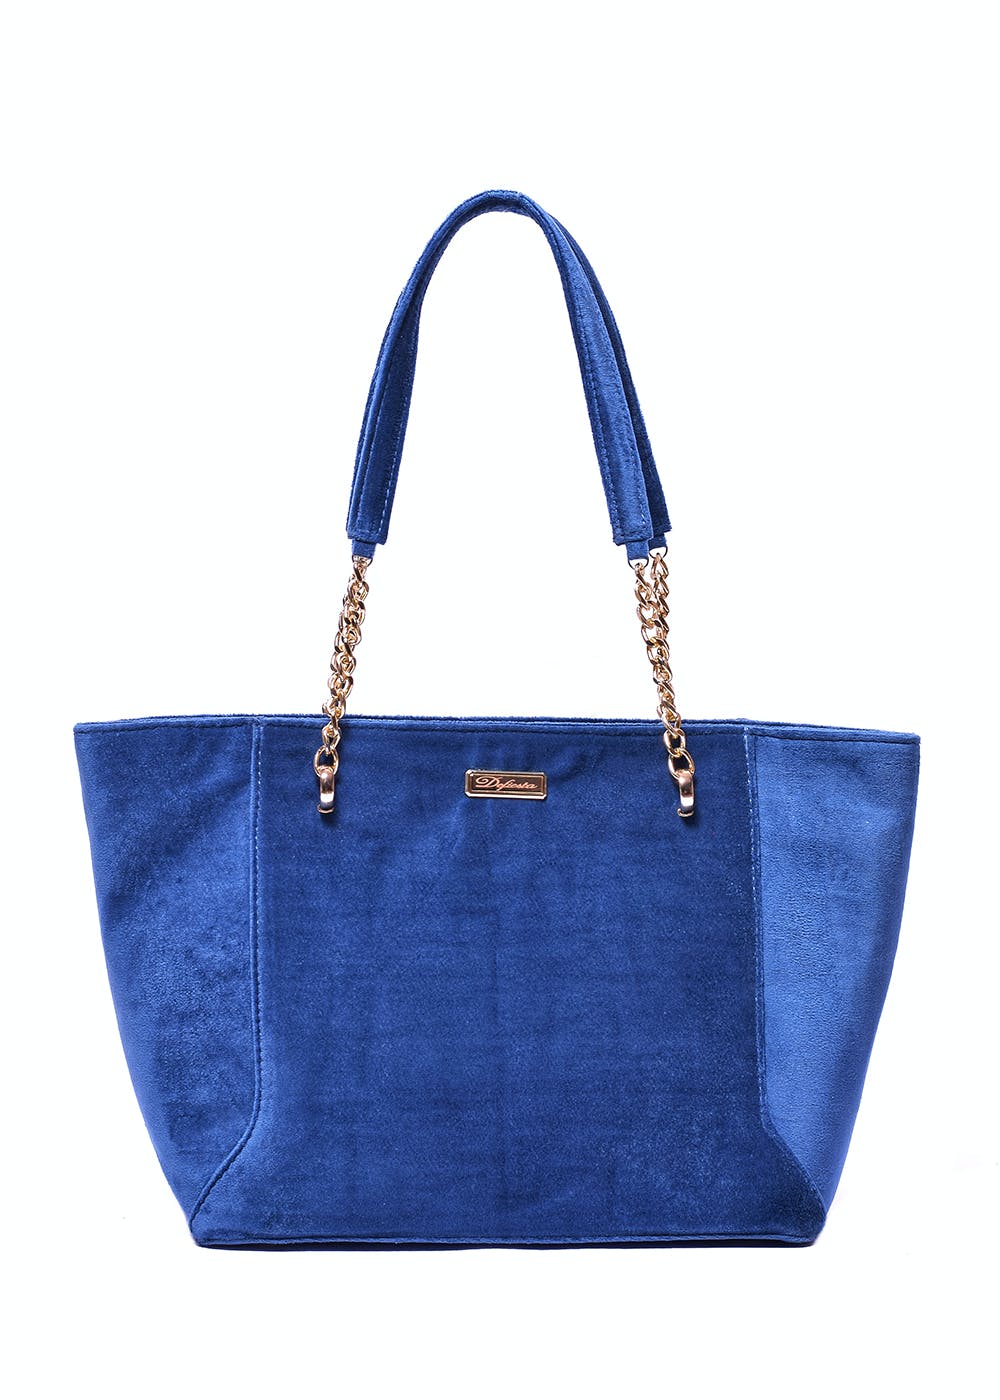 Blue Chain Link Handle Tote Bag